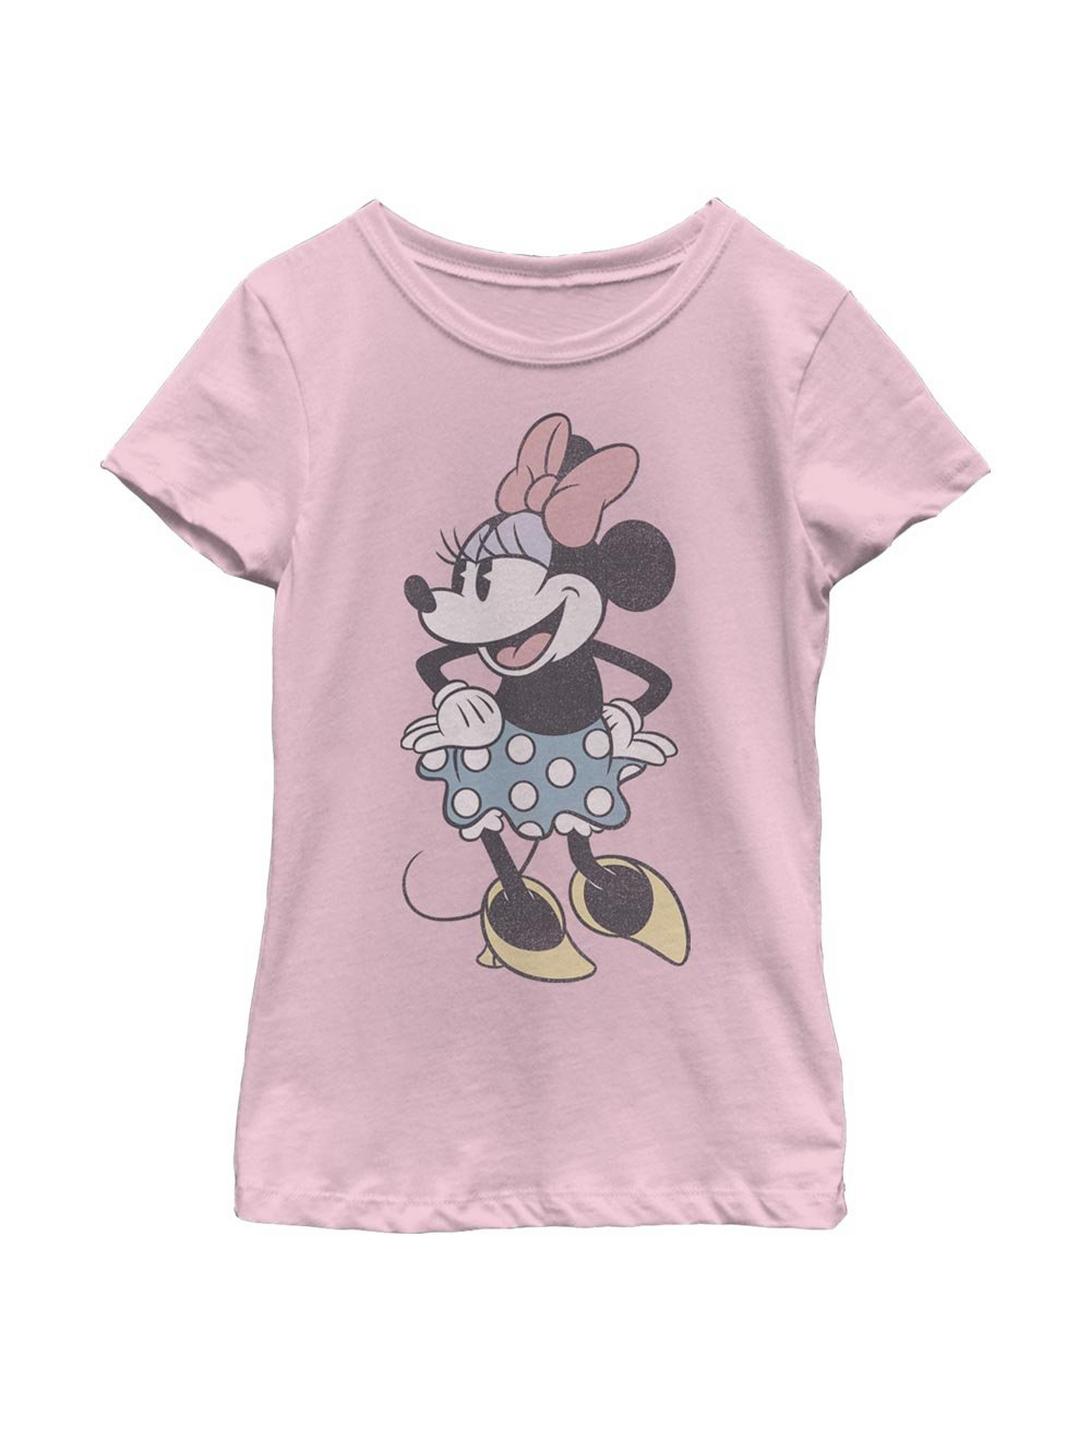 Plus Size Disney Mickey Mouse Minnie Sass Youth Girls T-Shirt, PINK, hi-res